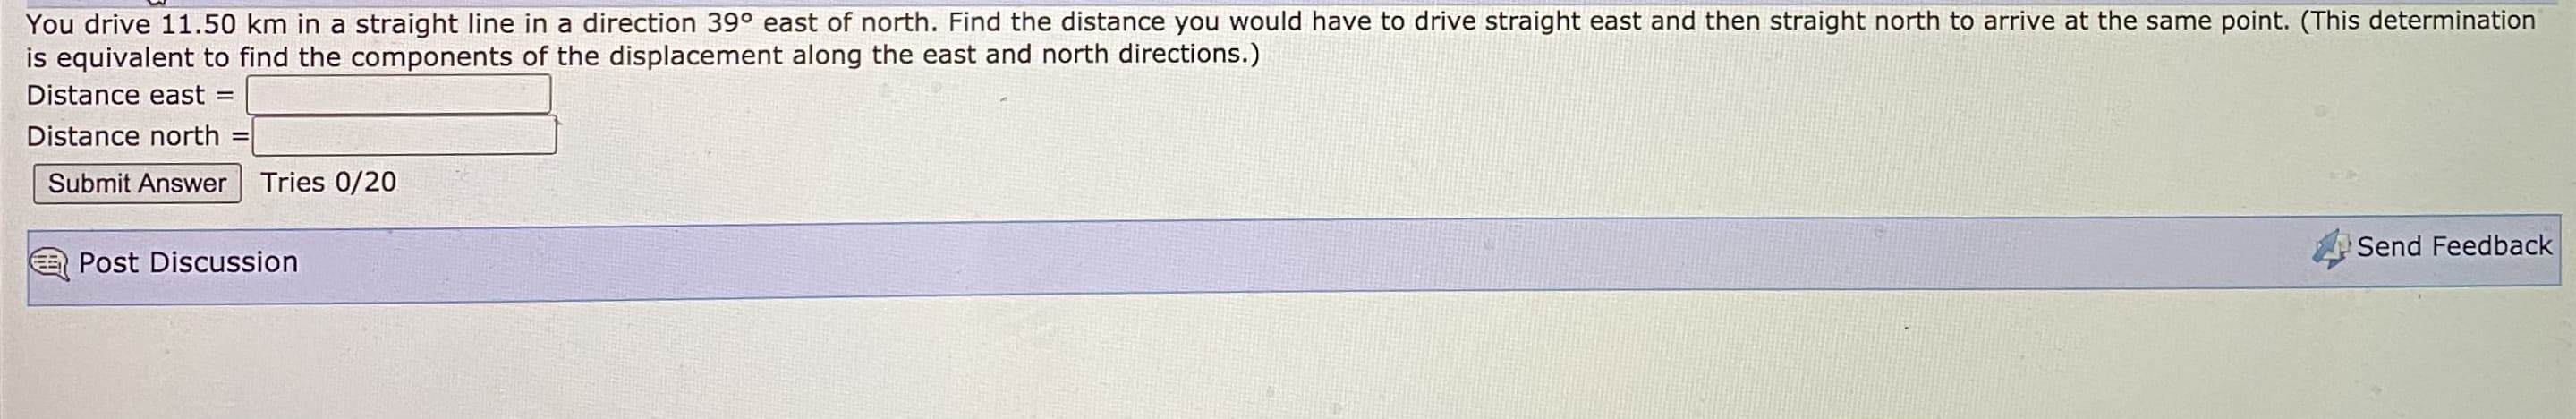 You drive 11.50 km in a straight line in a direction 39° east of north. Find the distance you would have to drive straight east and then straight north to arrive at the same point. (This determination
is equivalent to find the components of the displacement along the east and north directions.)
Distance east =
Distance north =
Submit Answer
Tries 0/20
Send Feedba
Post Discussion
